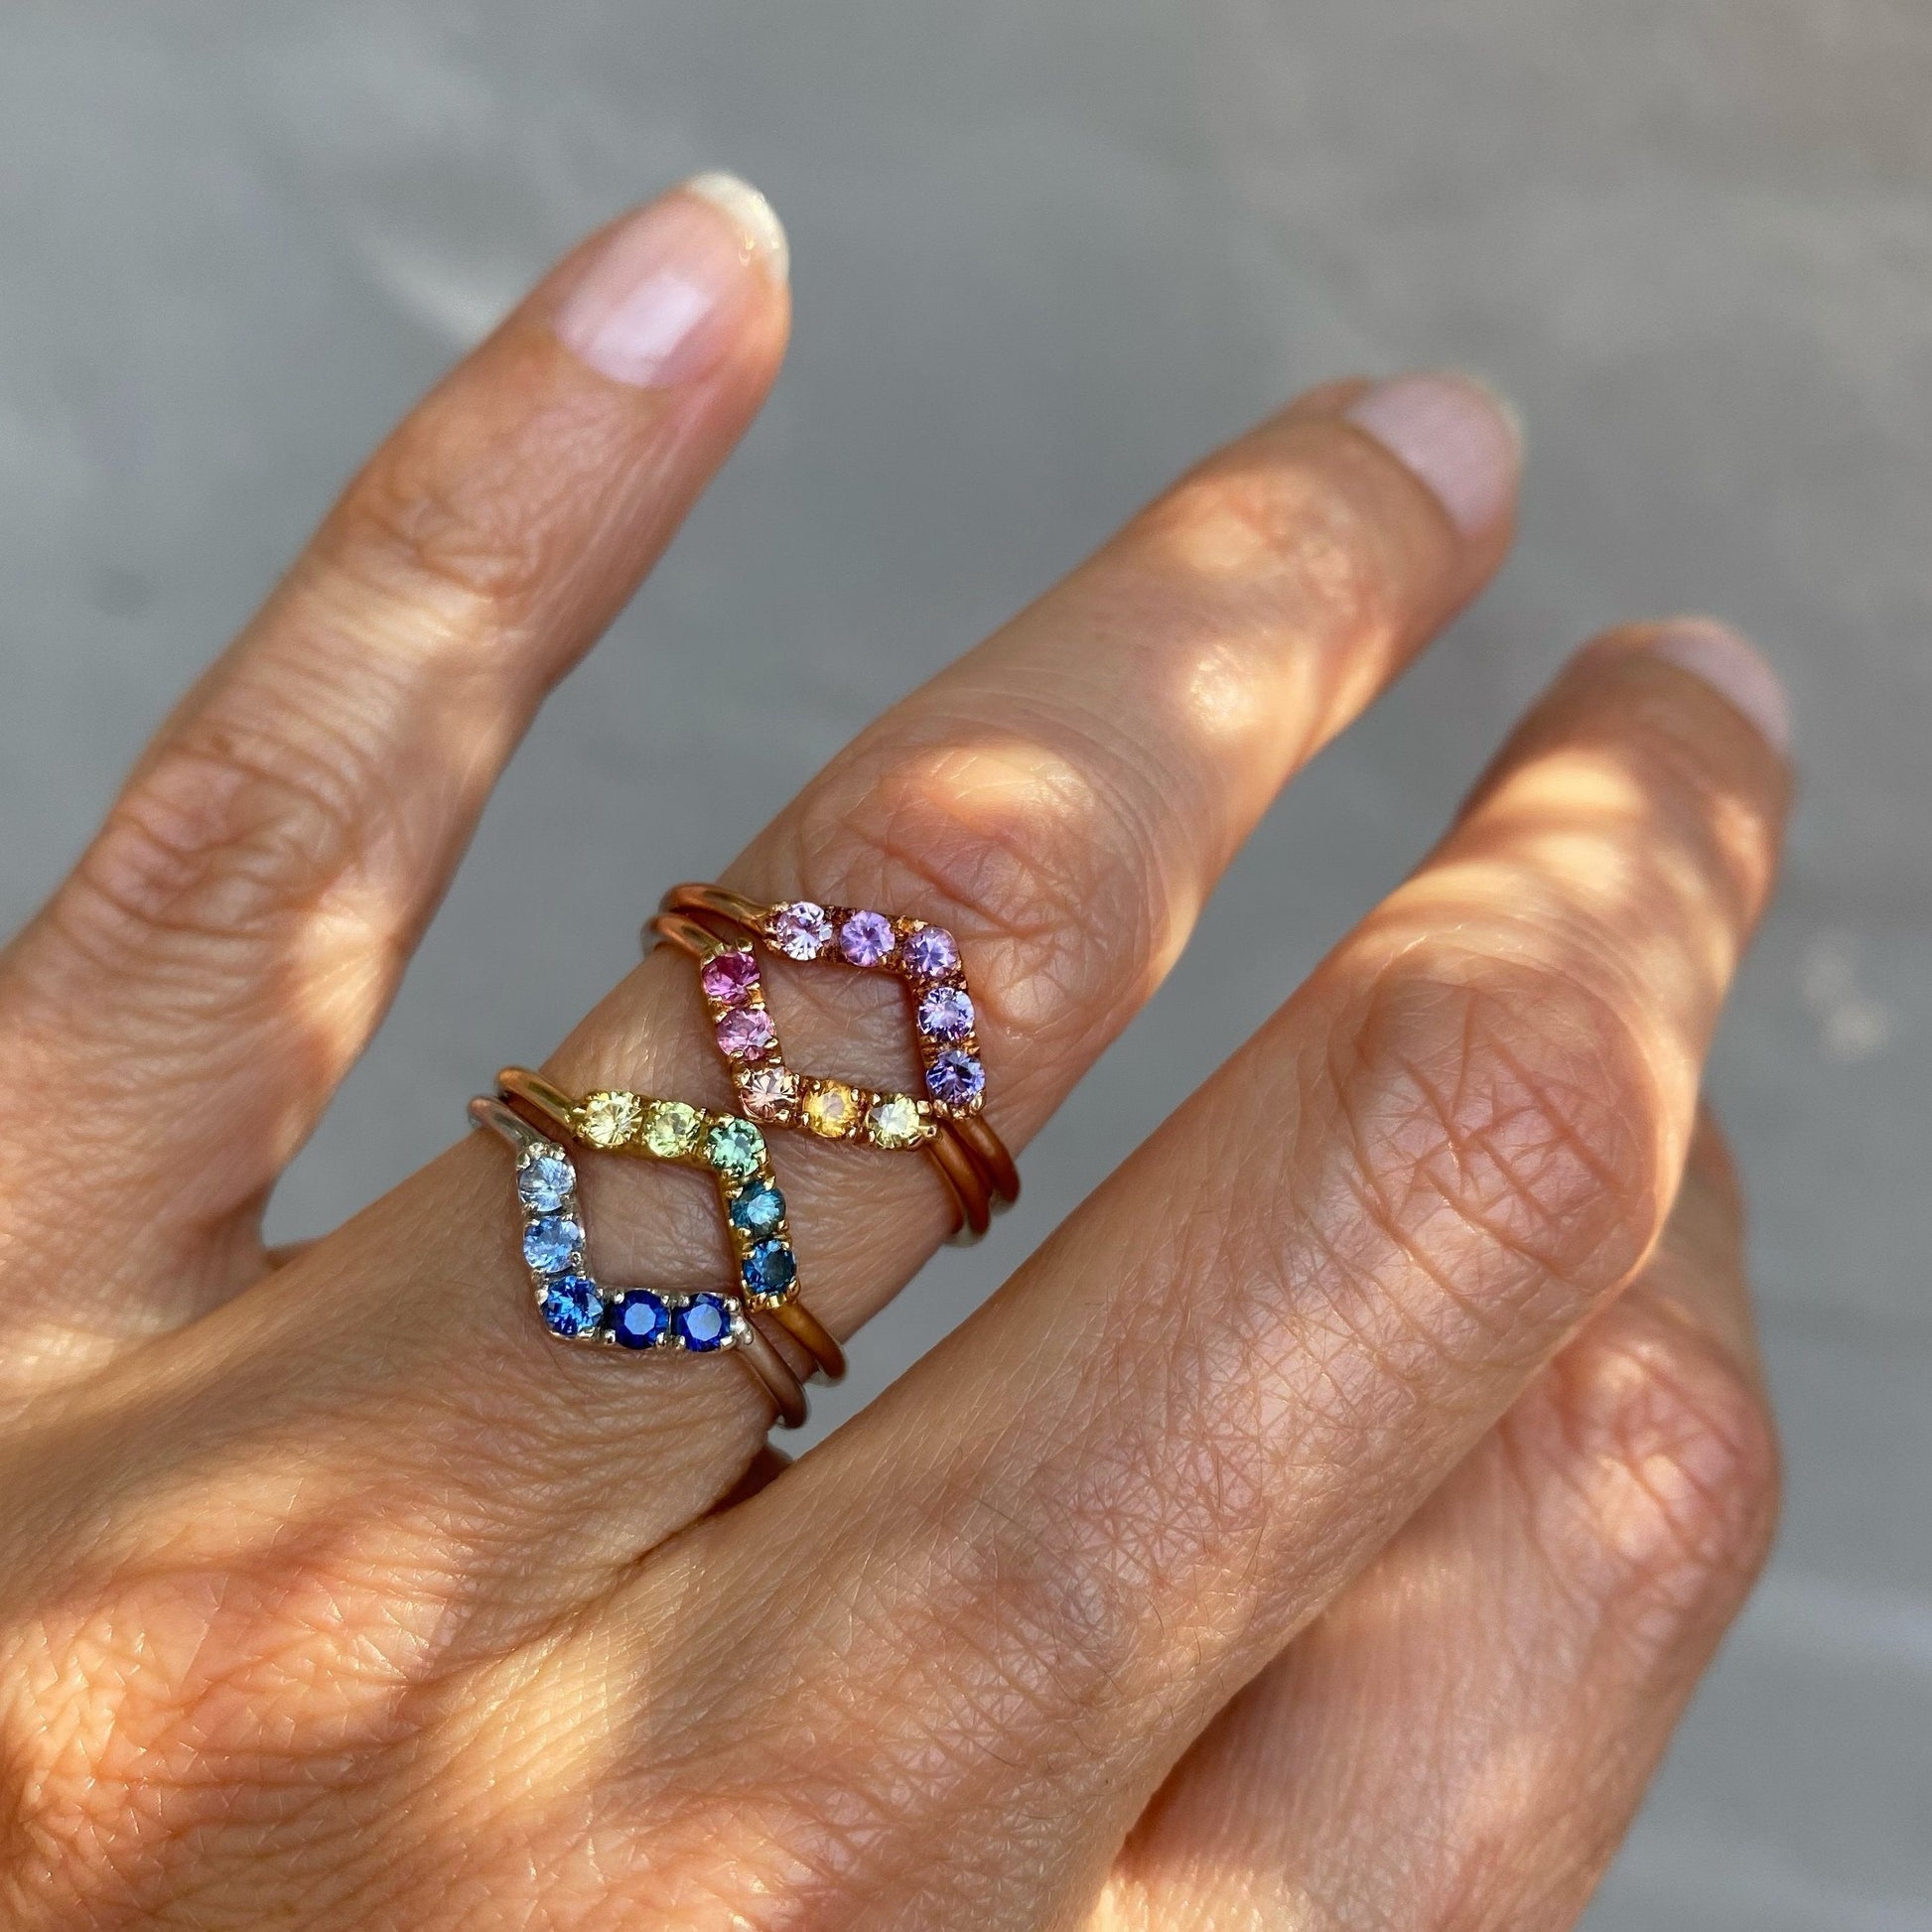 Agave Chev Ombré Sapphire Chevron Ring line + hue collaboration with NIXIN Jewelry